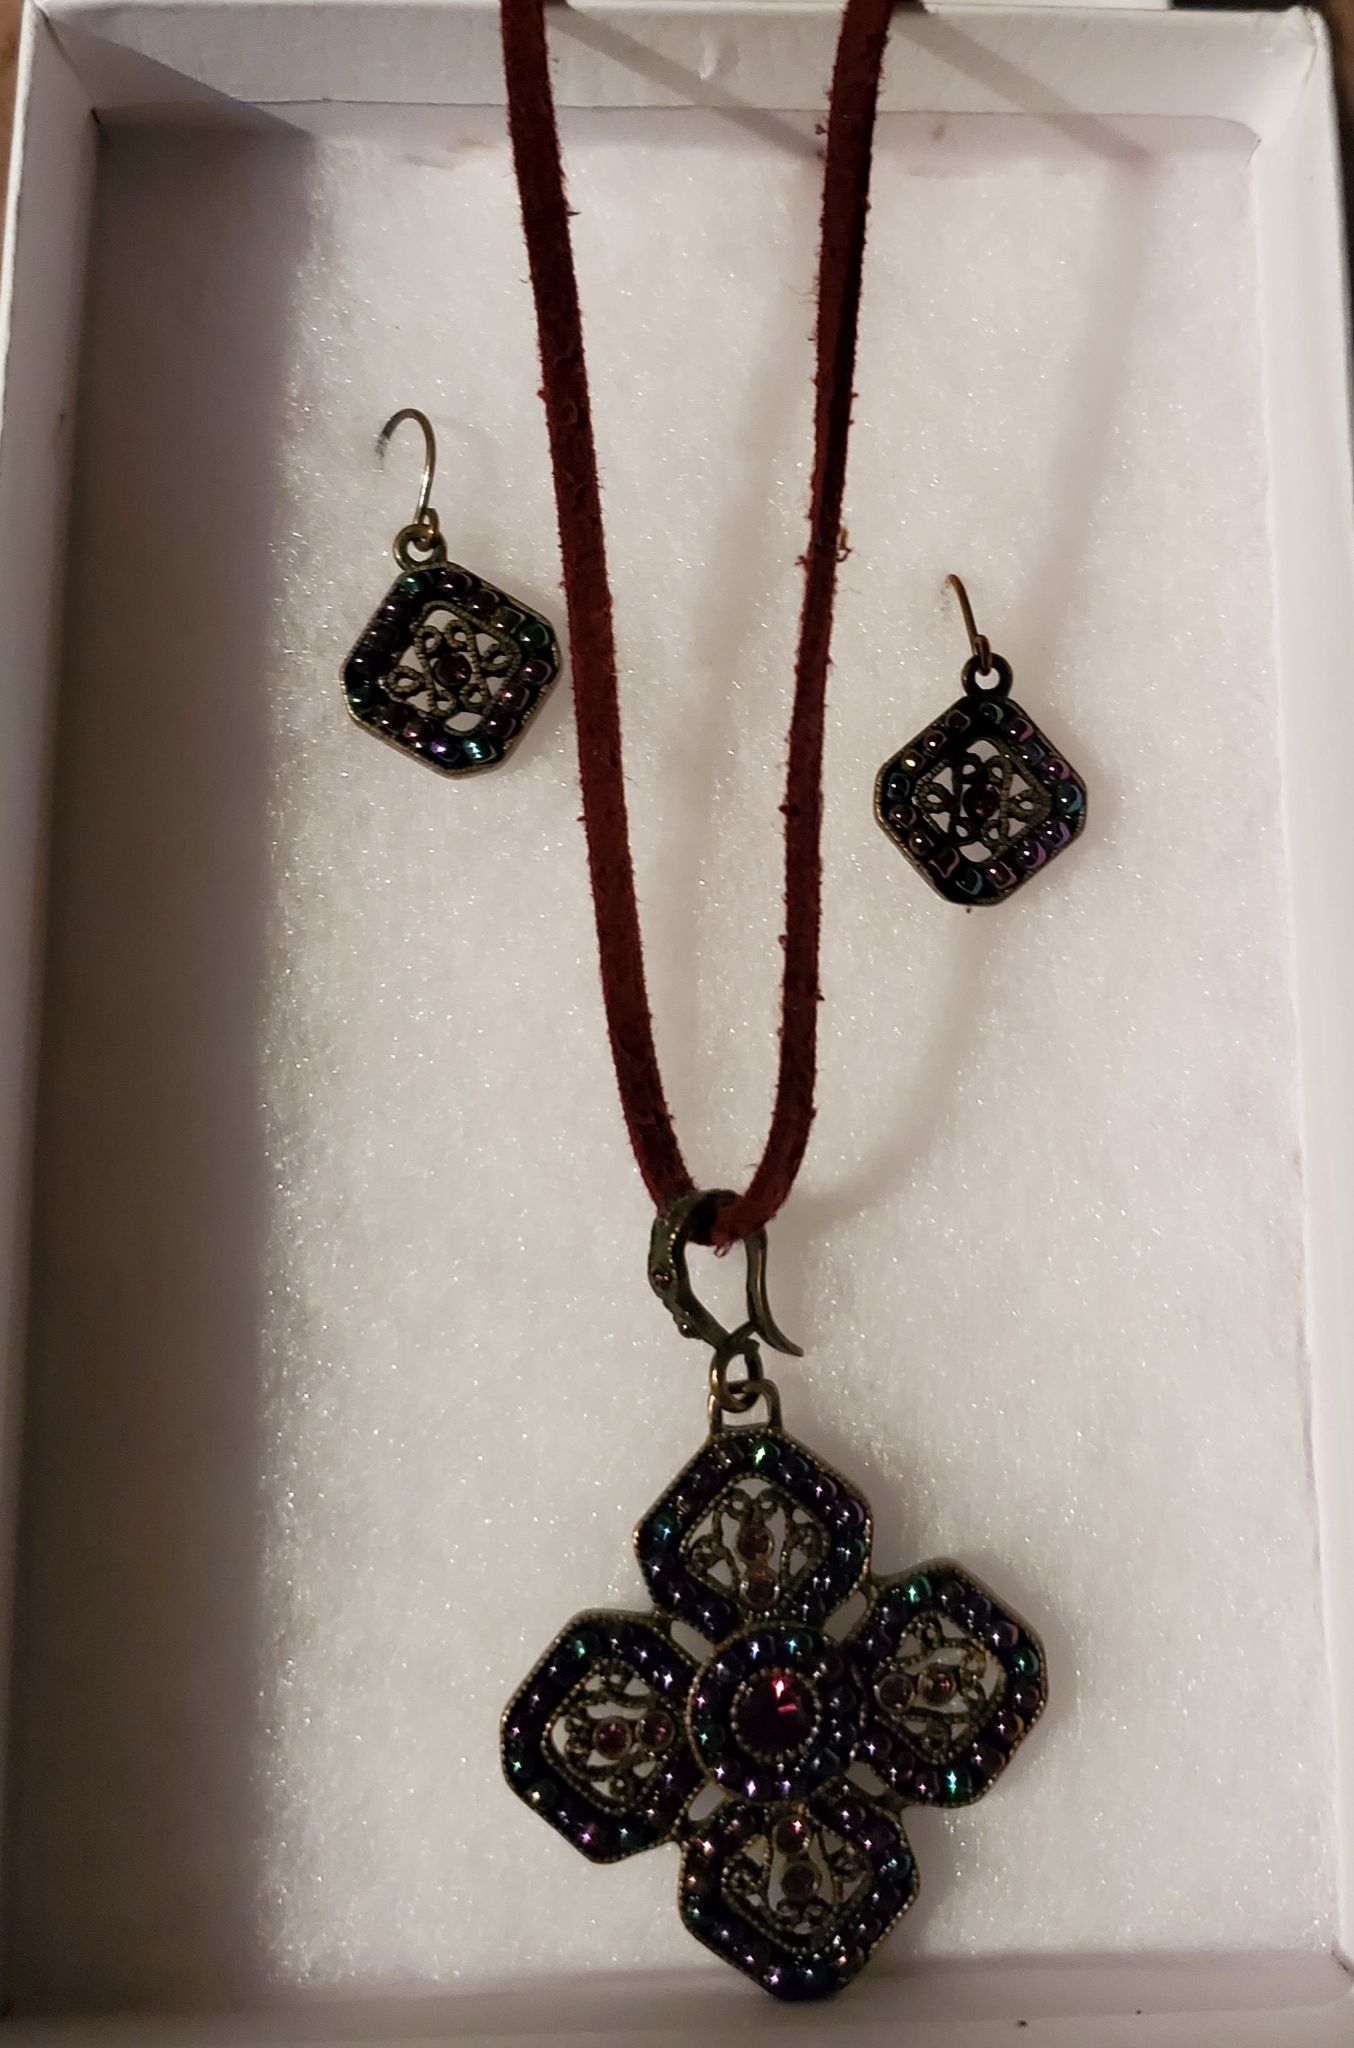 Premier Designs Vintage Silver Tone Marcasite, Onyx, and Rhinestone Necklace with Matching Earrings (PD Hallmark)